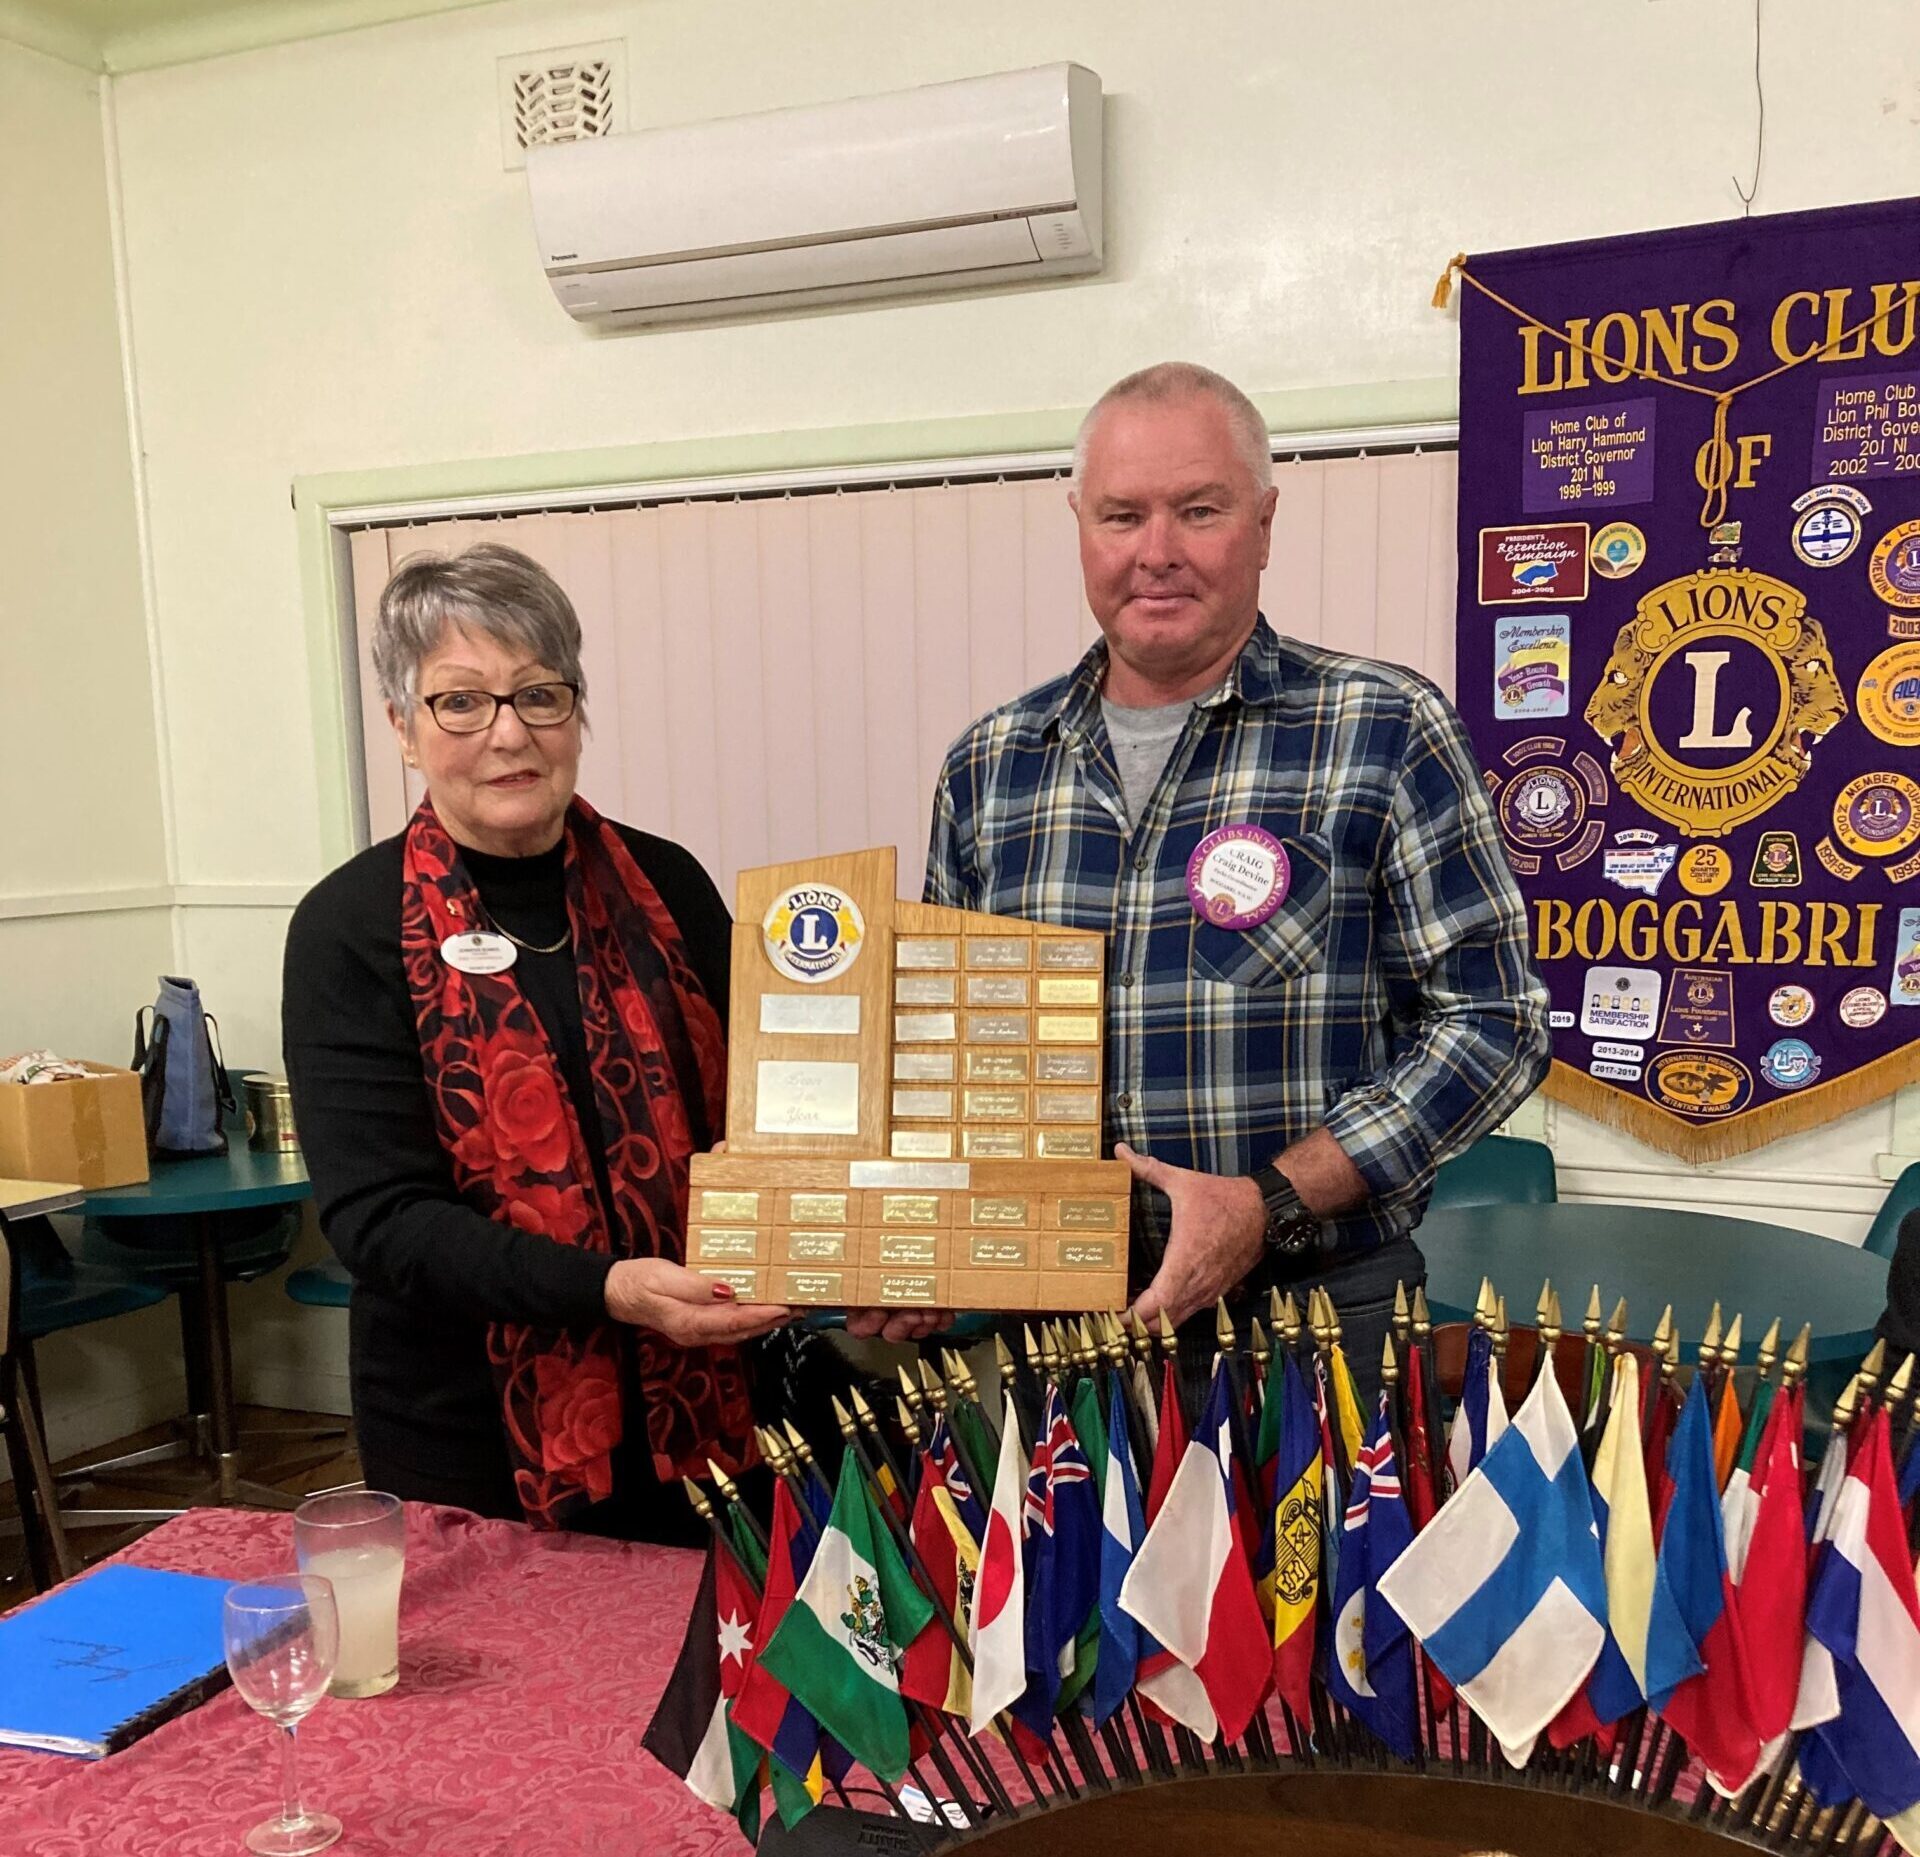 Lions+Club+honors+students+and+members+at+annual+banquet+%E2%80%93+Times+News+Online